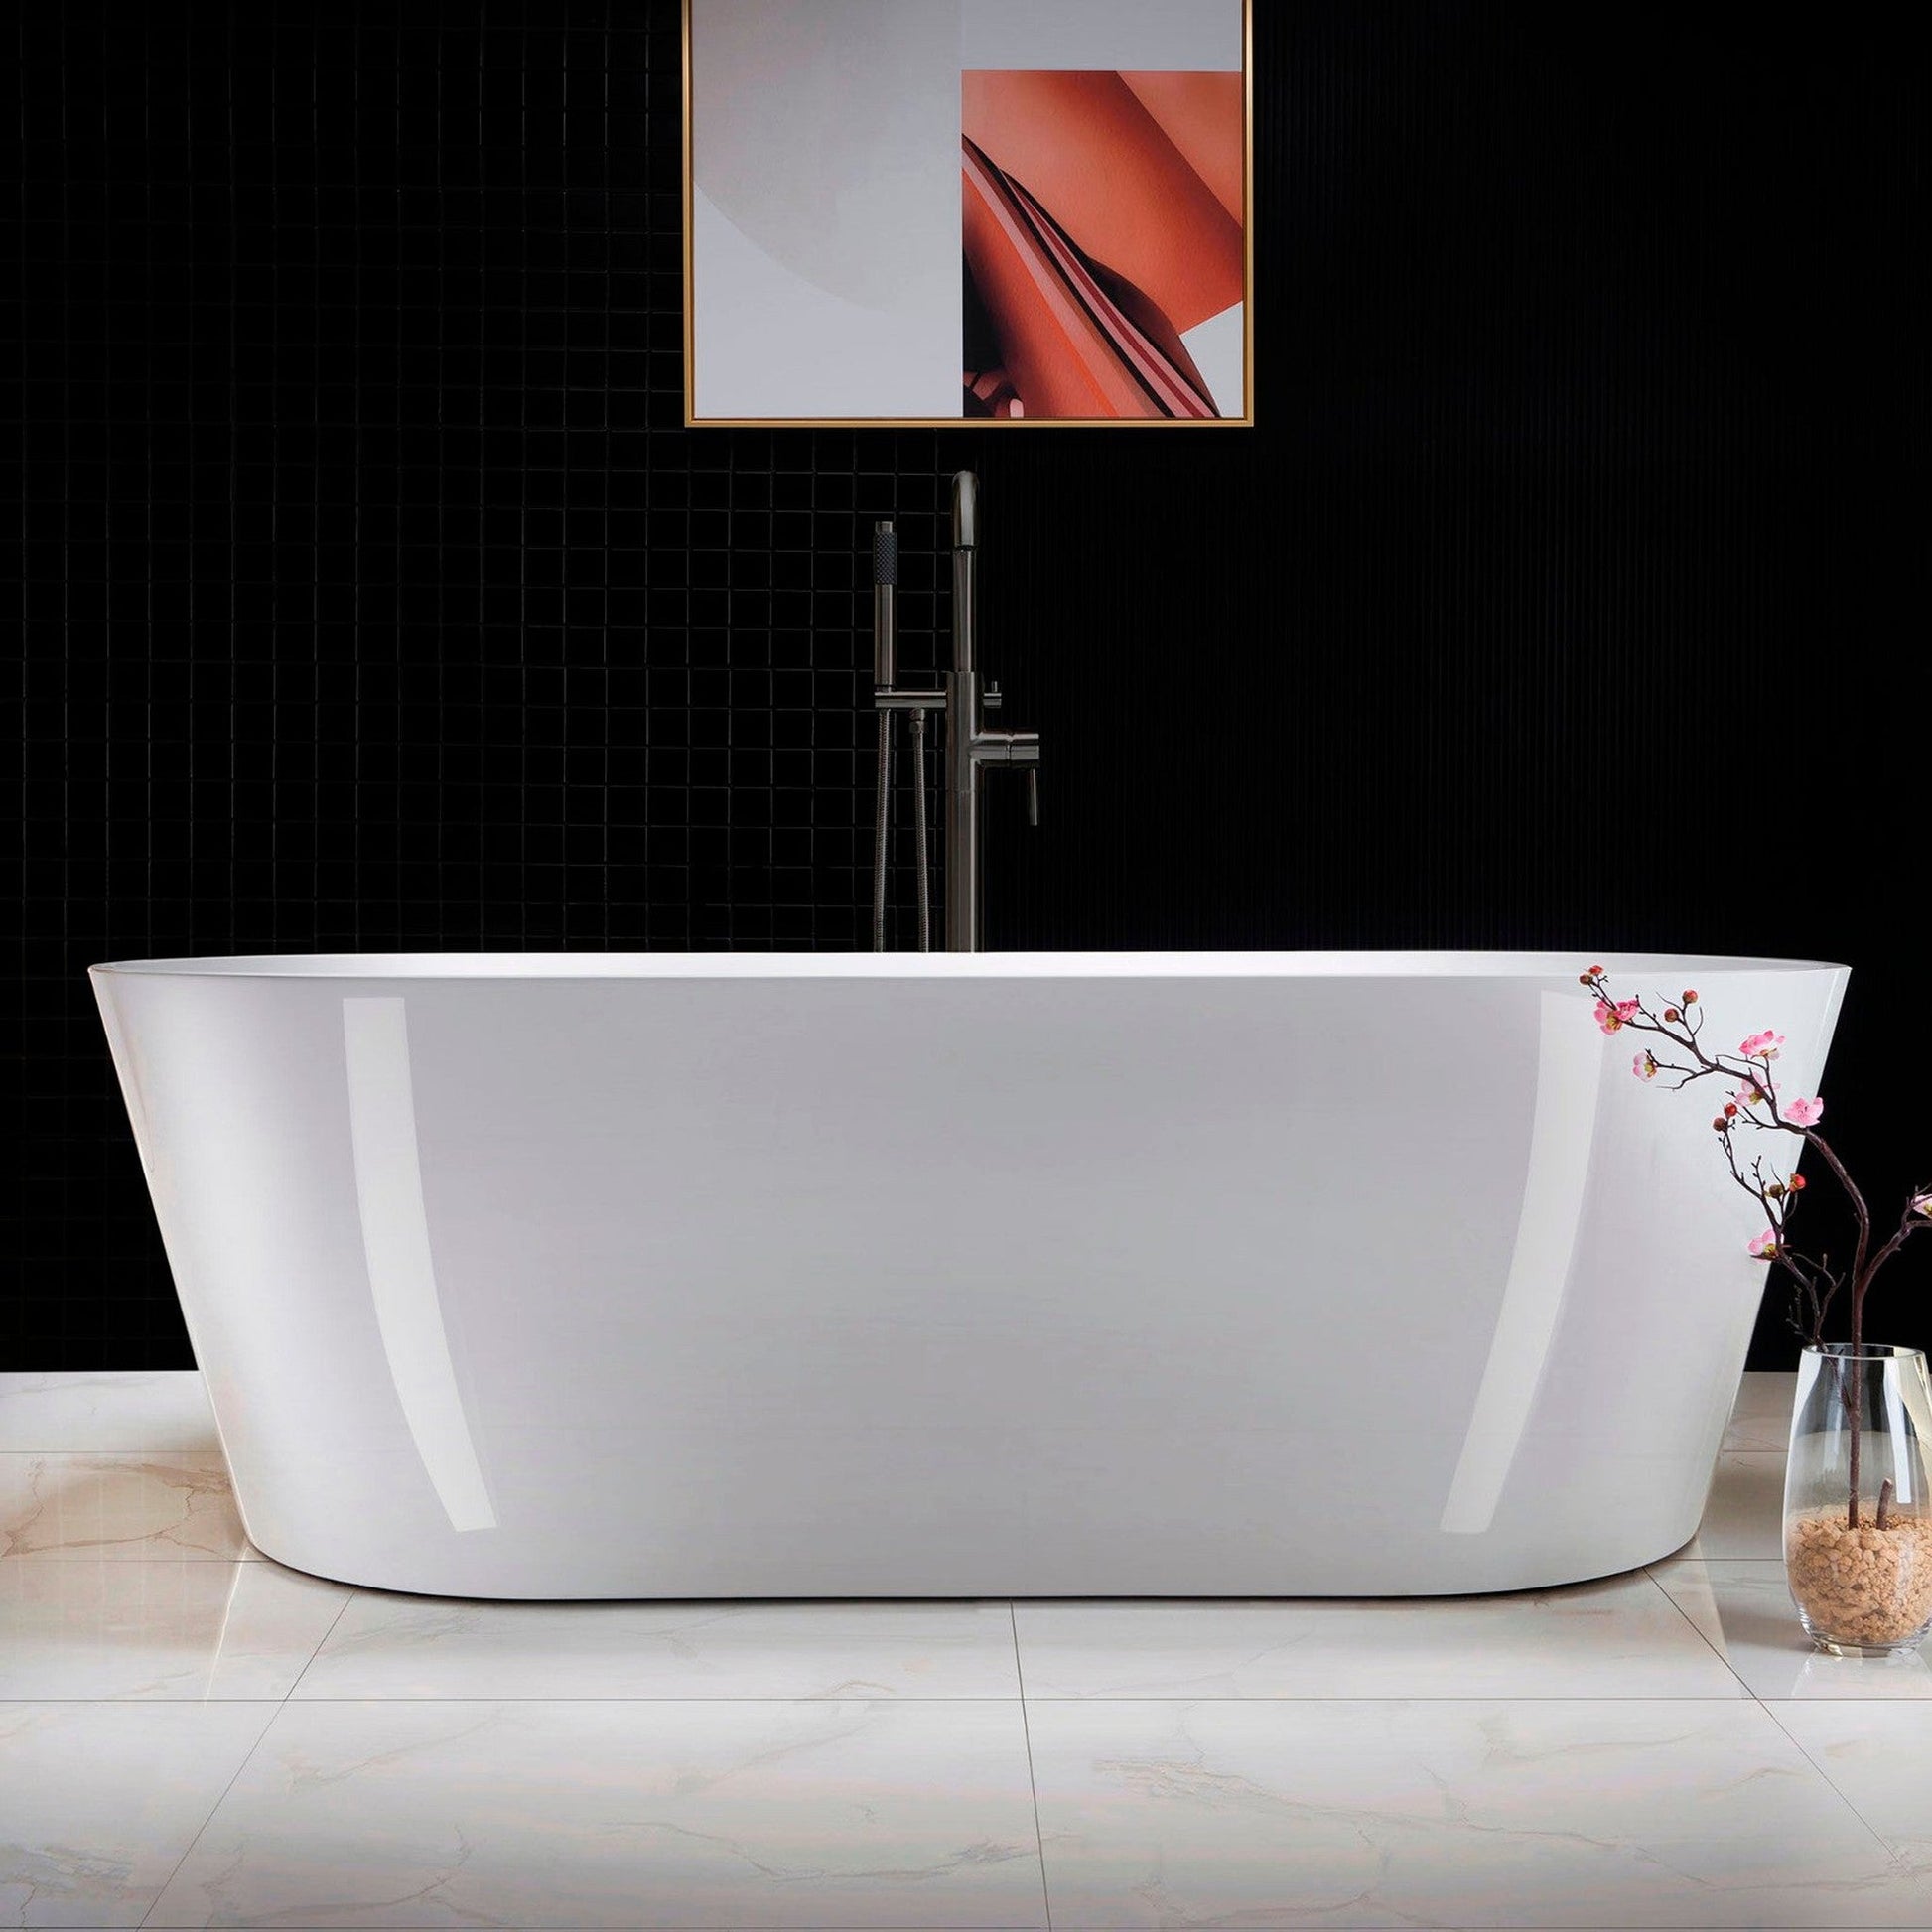 WoodBridge 71" White Acrylic Freestanding Contemporary Soaking Bathtub With Matte Black Drain, Overflow, F-0015 Tub Filler and Caddy Tray